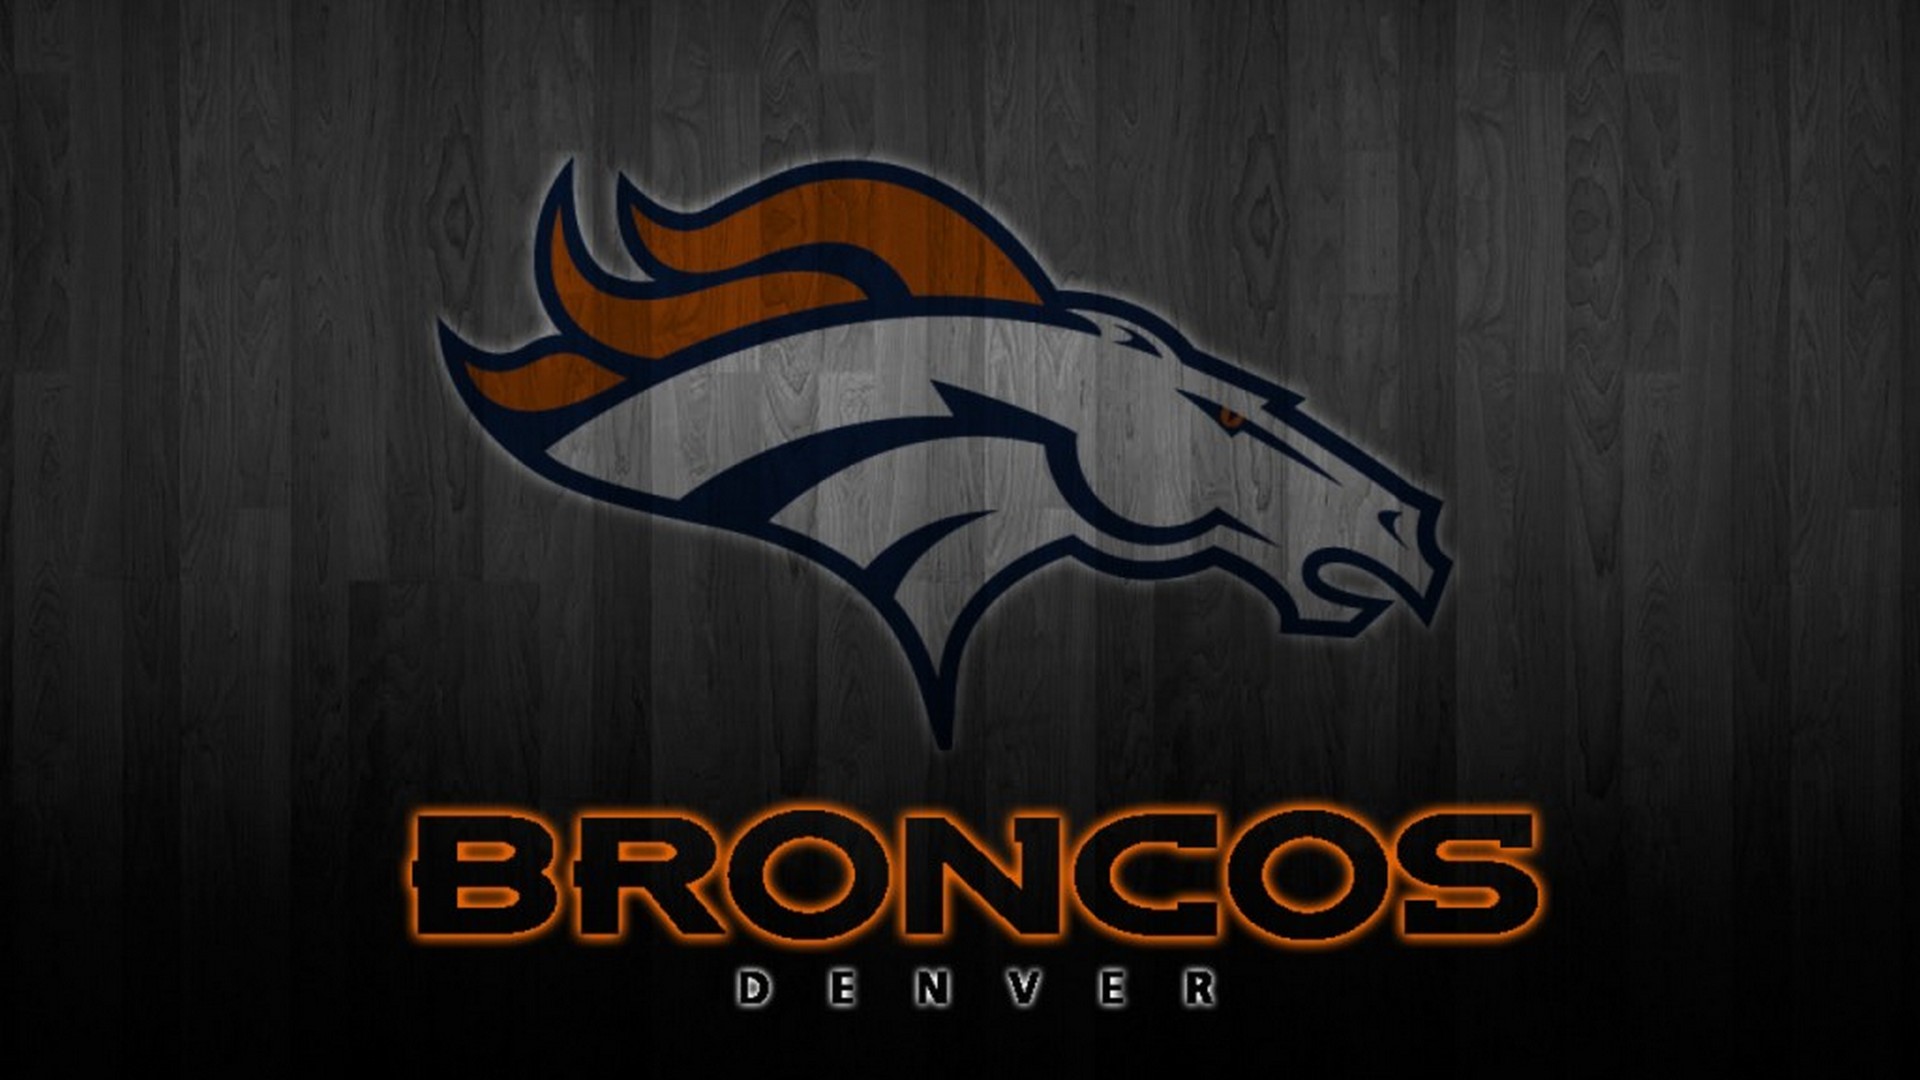 Wallpaper Desktop Denver Broncos NFL HD With high-resolution 1920X1080 pixel. You can use this wallpaper for your Mac or Windows Desktop Background, iPhone, Android or Tablet and another Smartphone device